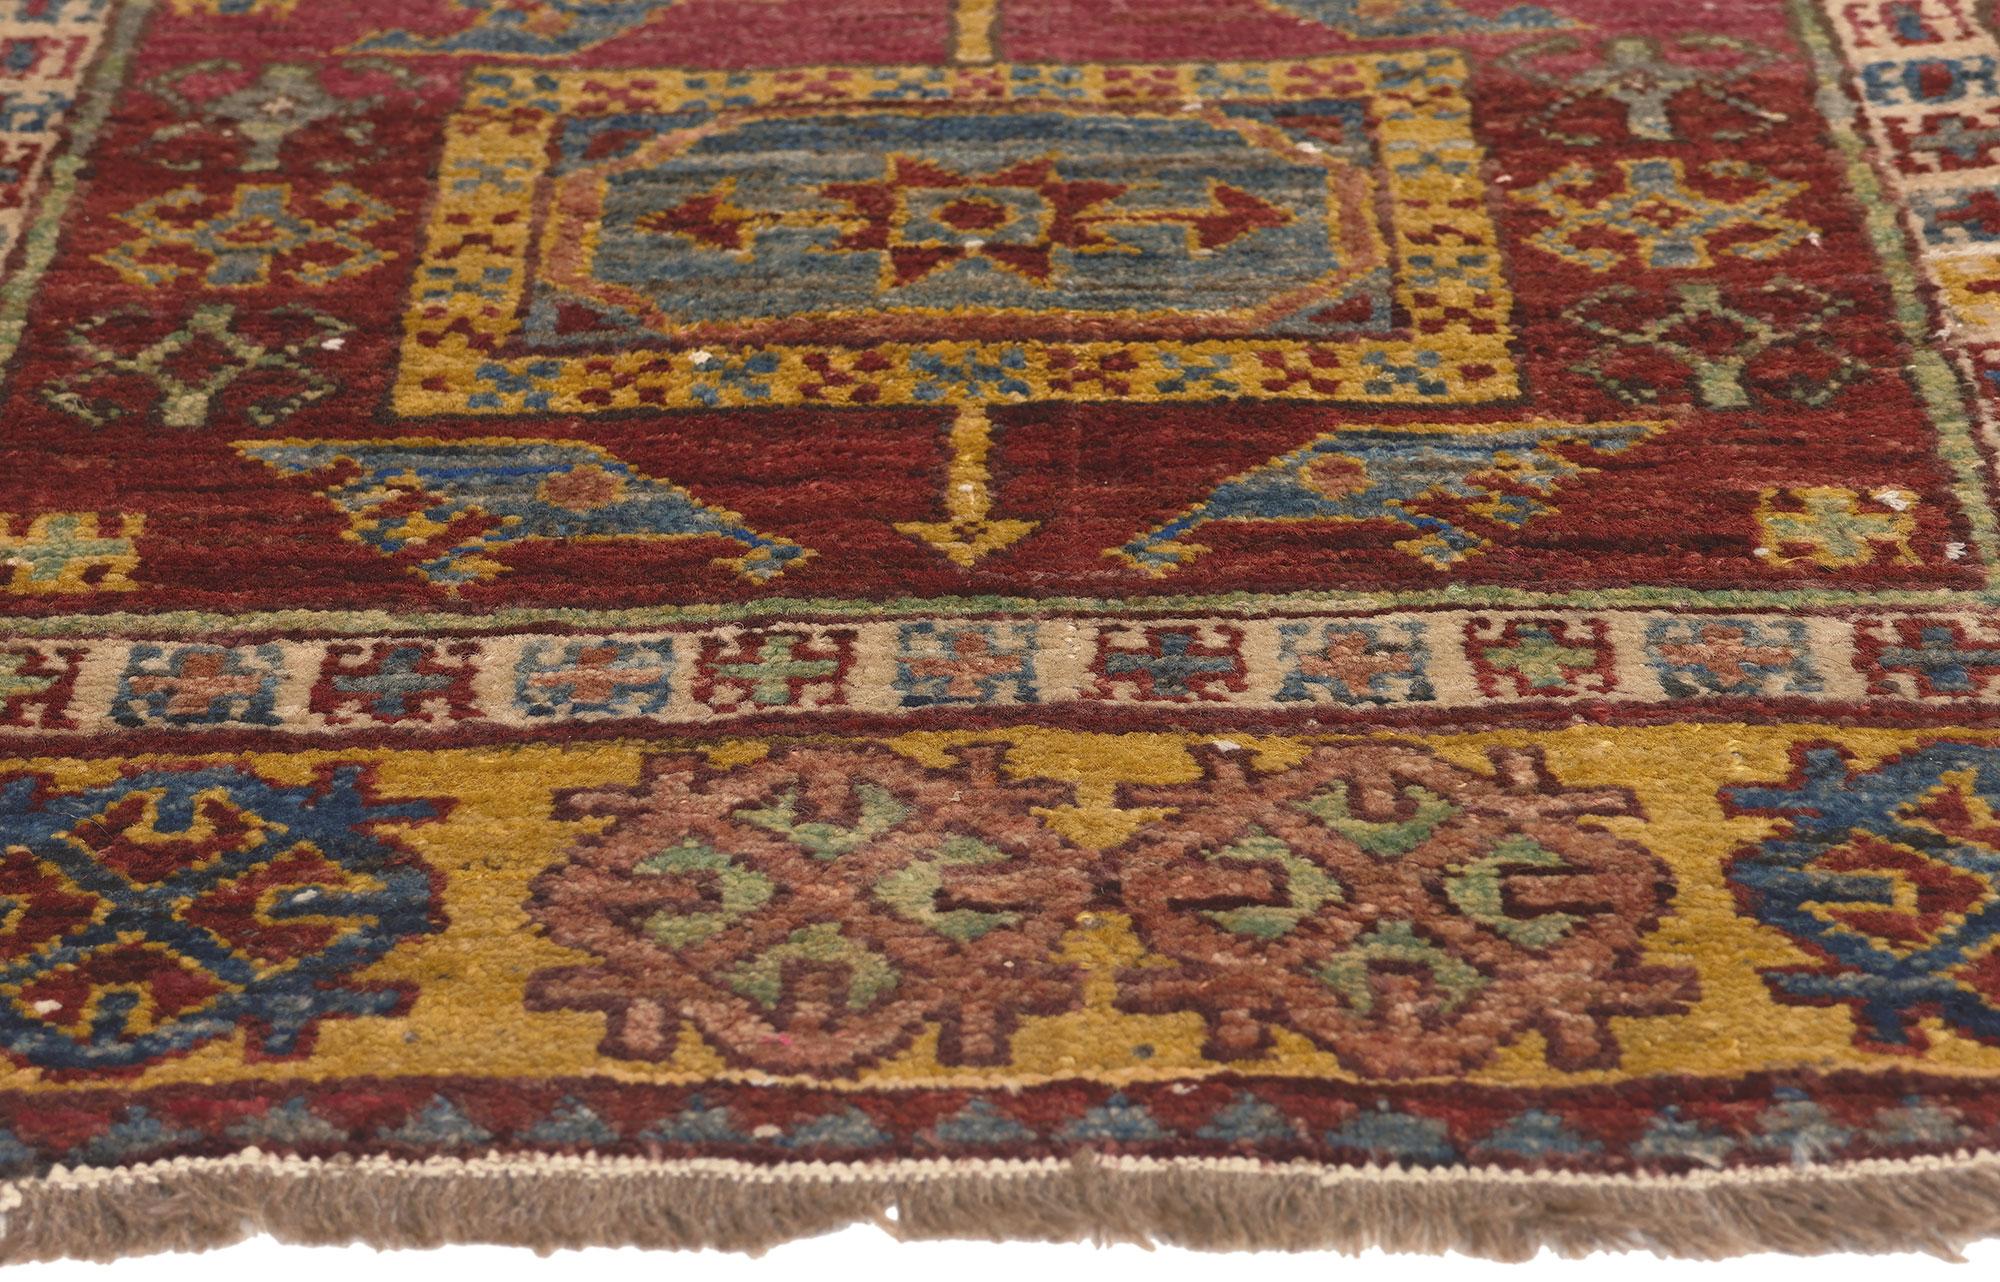 78630 Small Antique Turkish Oushak Rug, 02'10 x 02'06.
Nomadic charm meets Anatolian culture in this small antique Turkish Oushak rug. The tribal design and earthy colorway woven into this piece work together creating a well-traveled, cultured